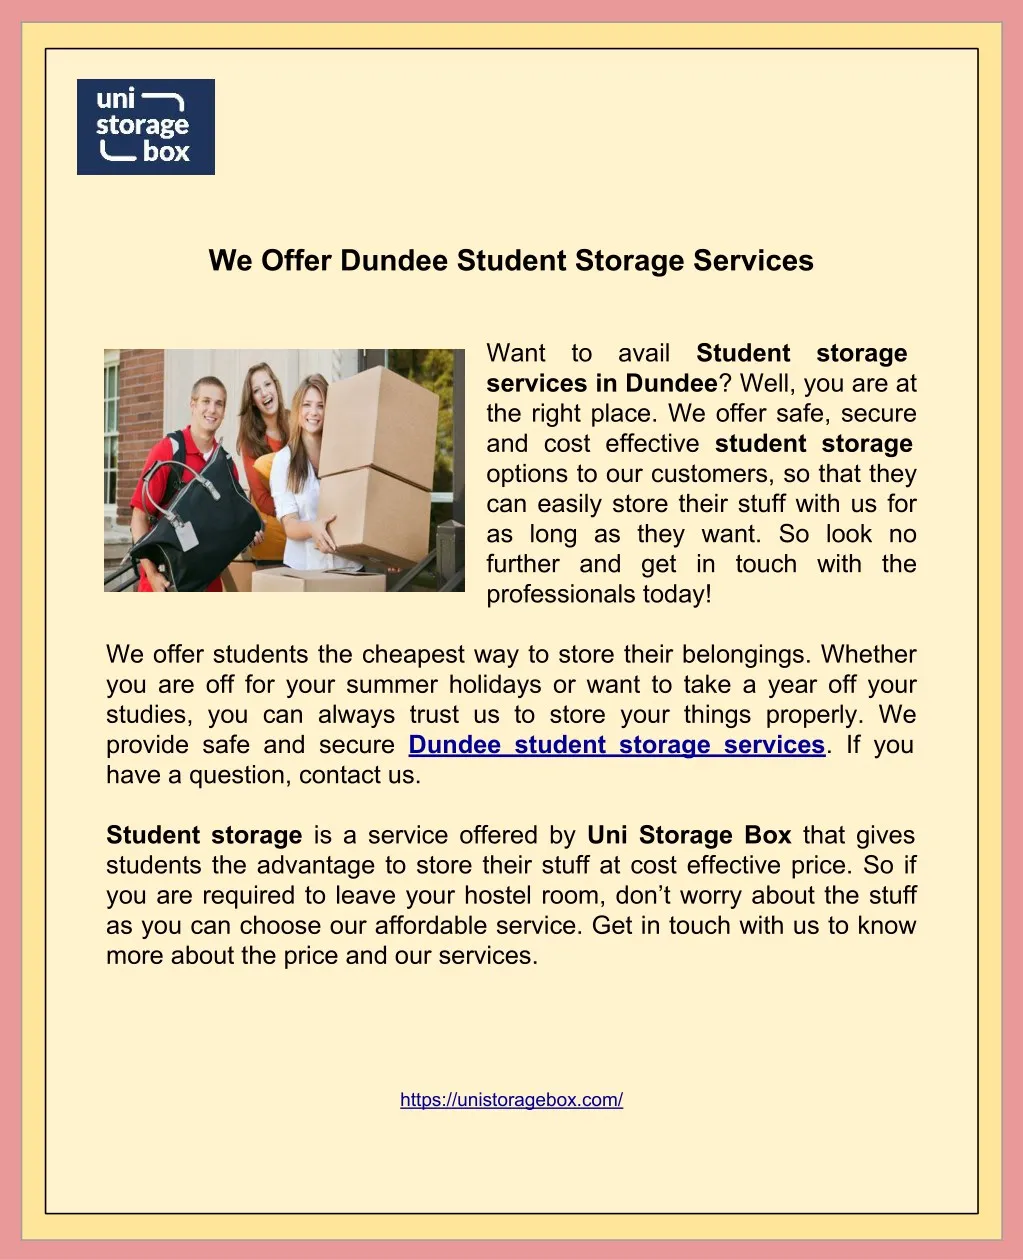 we offer dundee student storage services